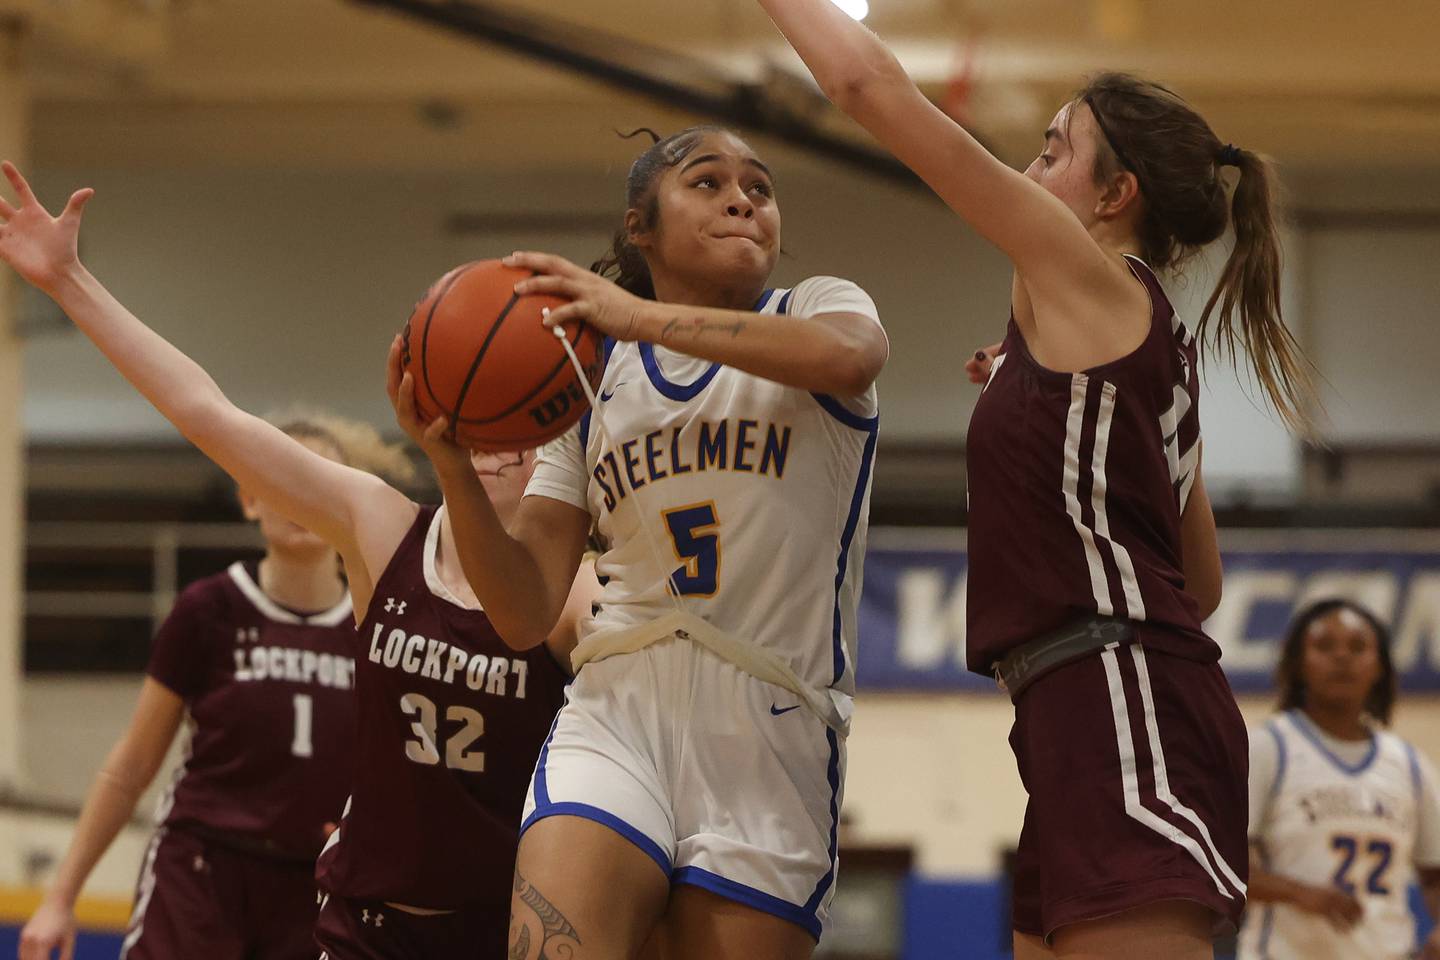 Joliet Central’s Joyce Tua-Link goes in for the basket against Lockport.